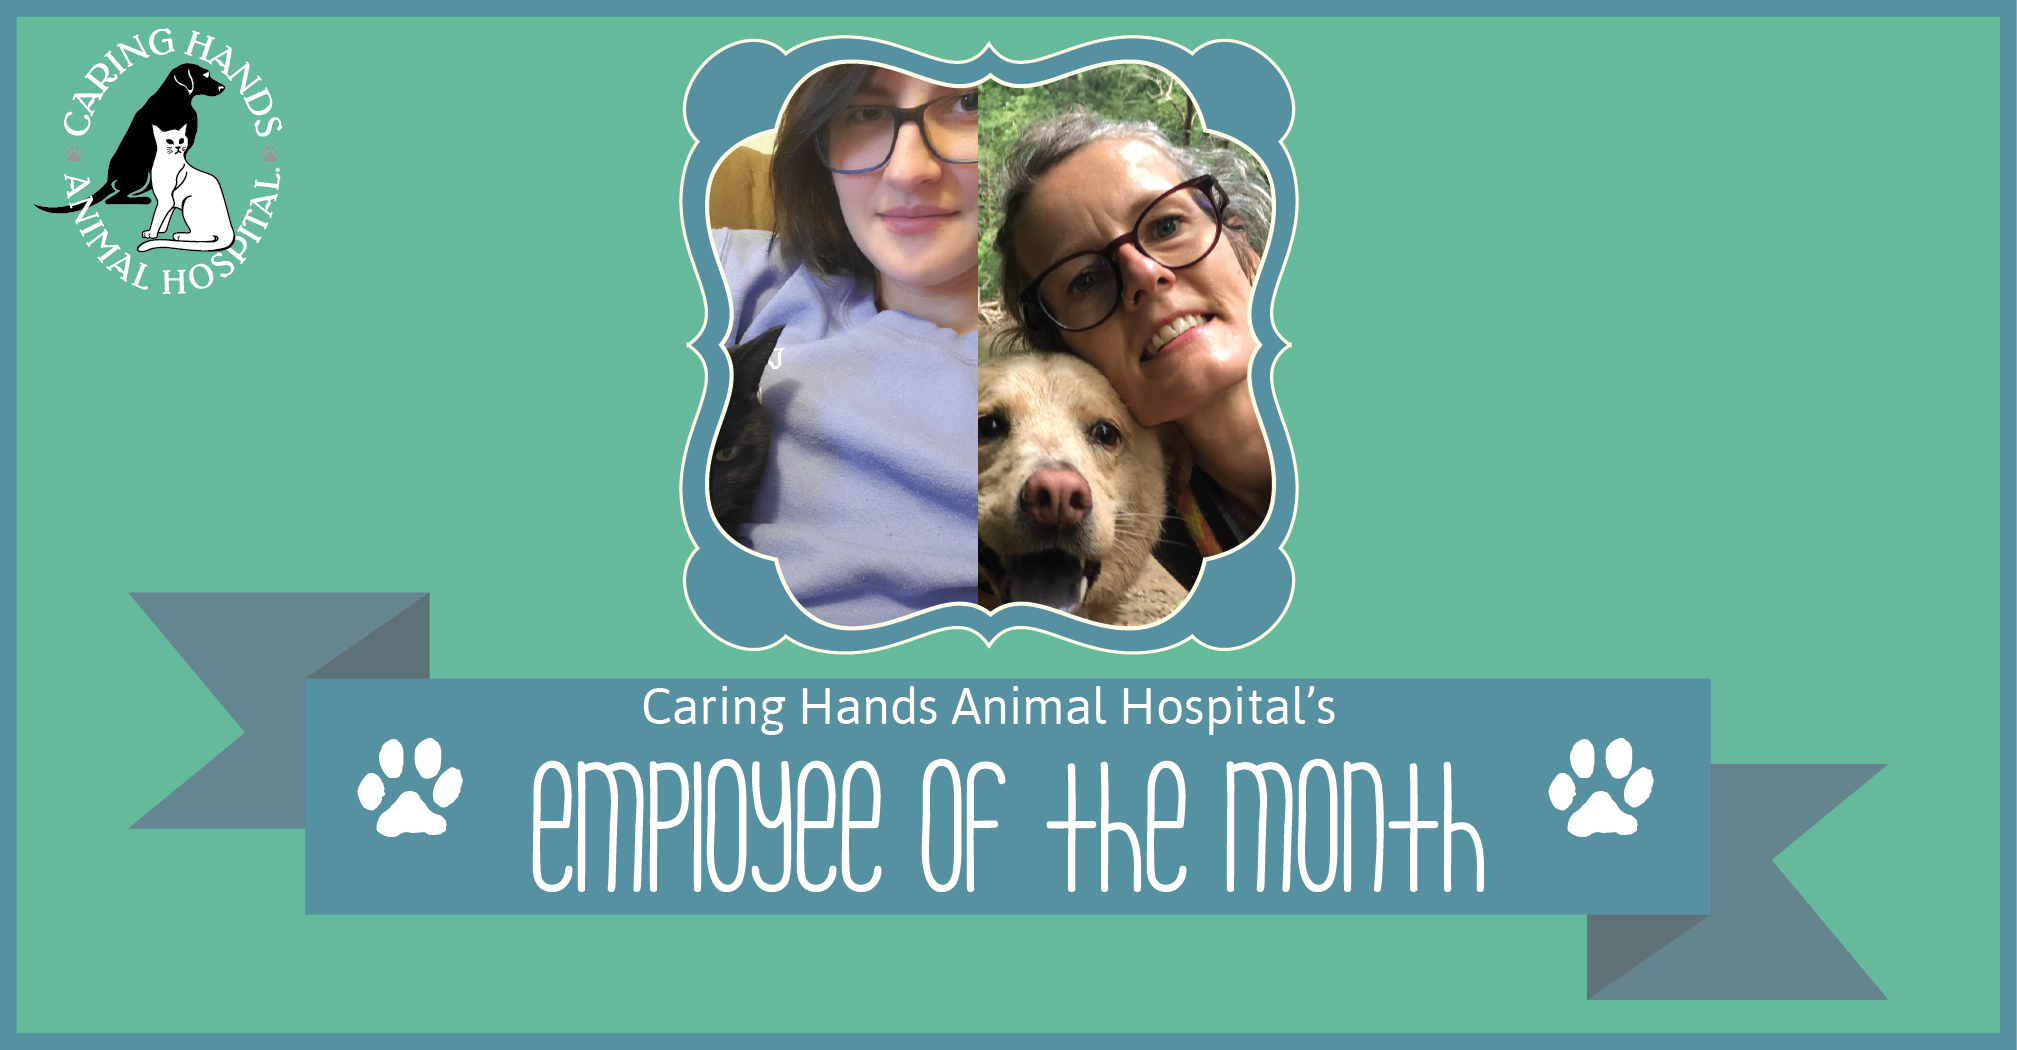 Employee of the Month - Caring Hands Animal Hospital